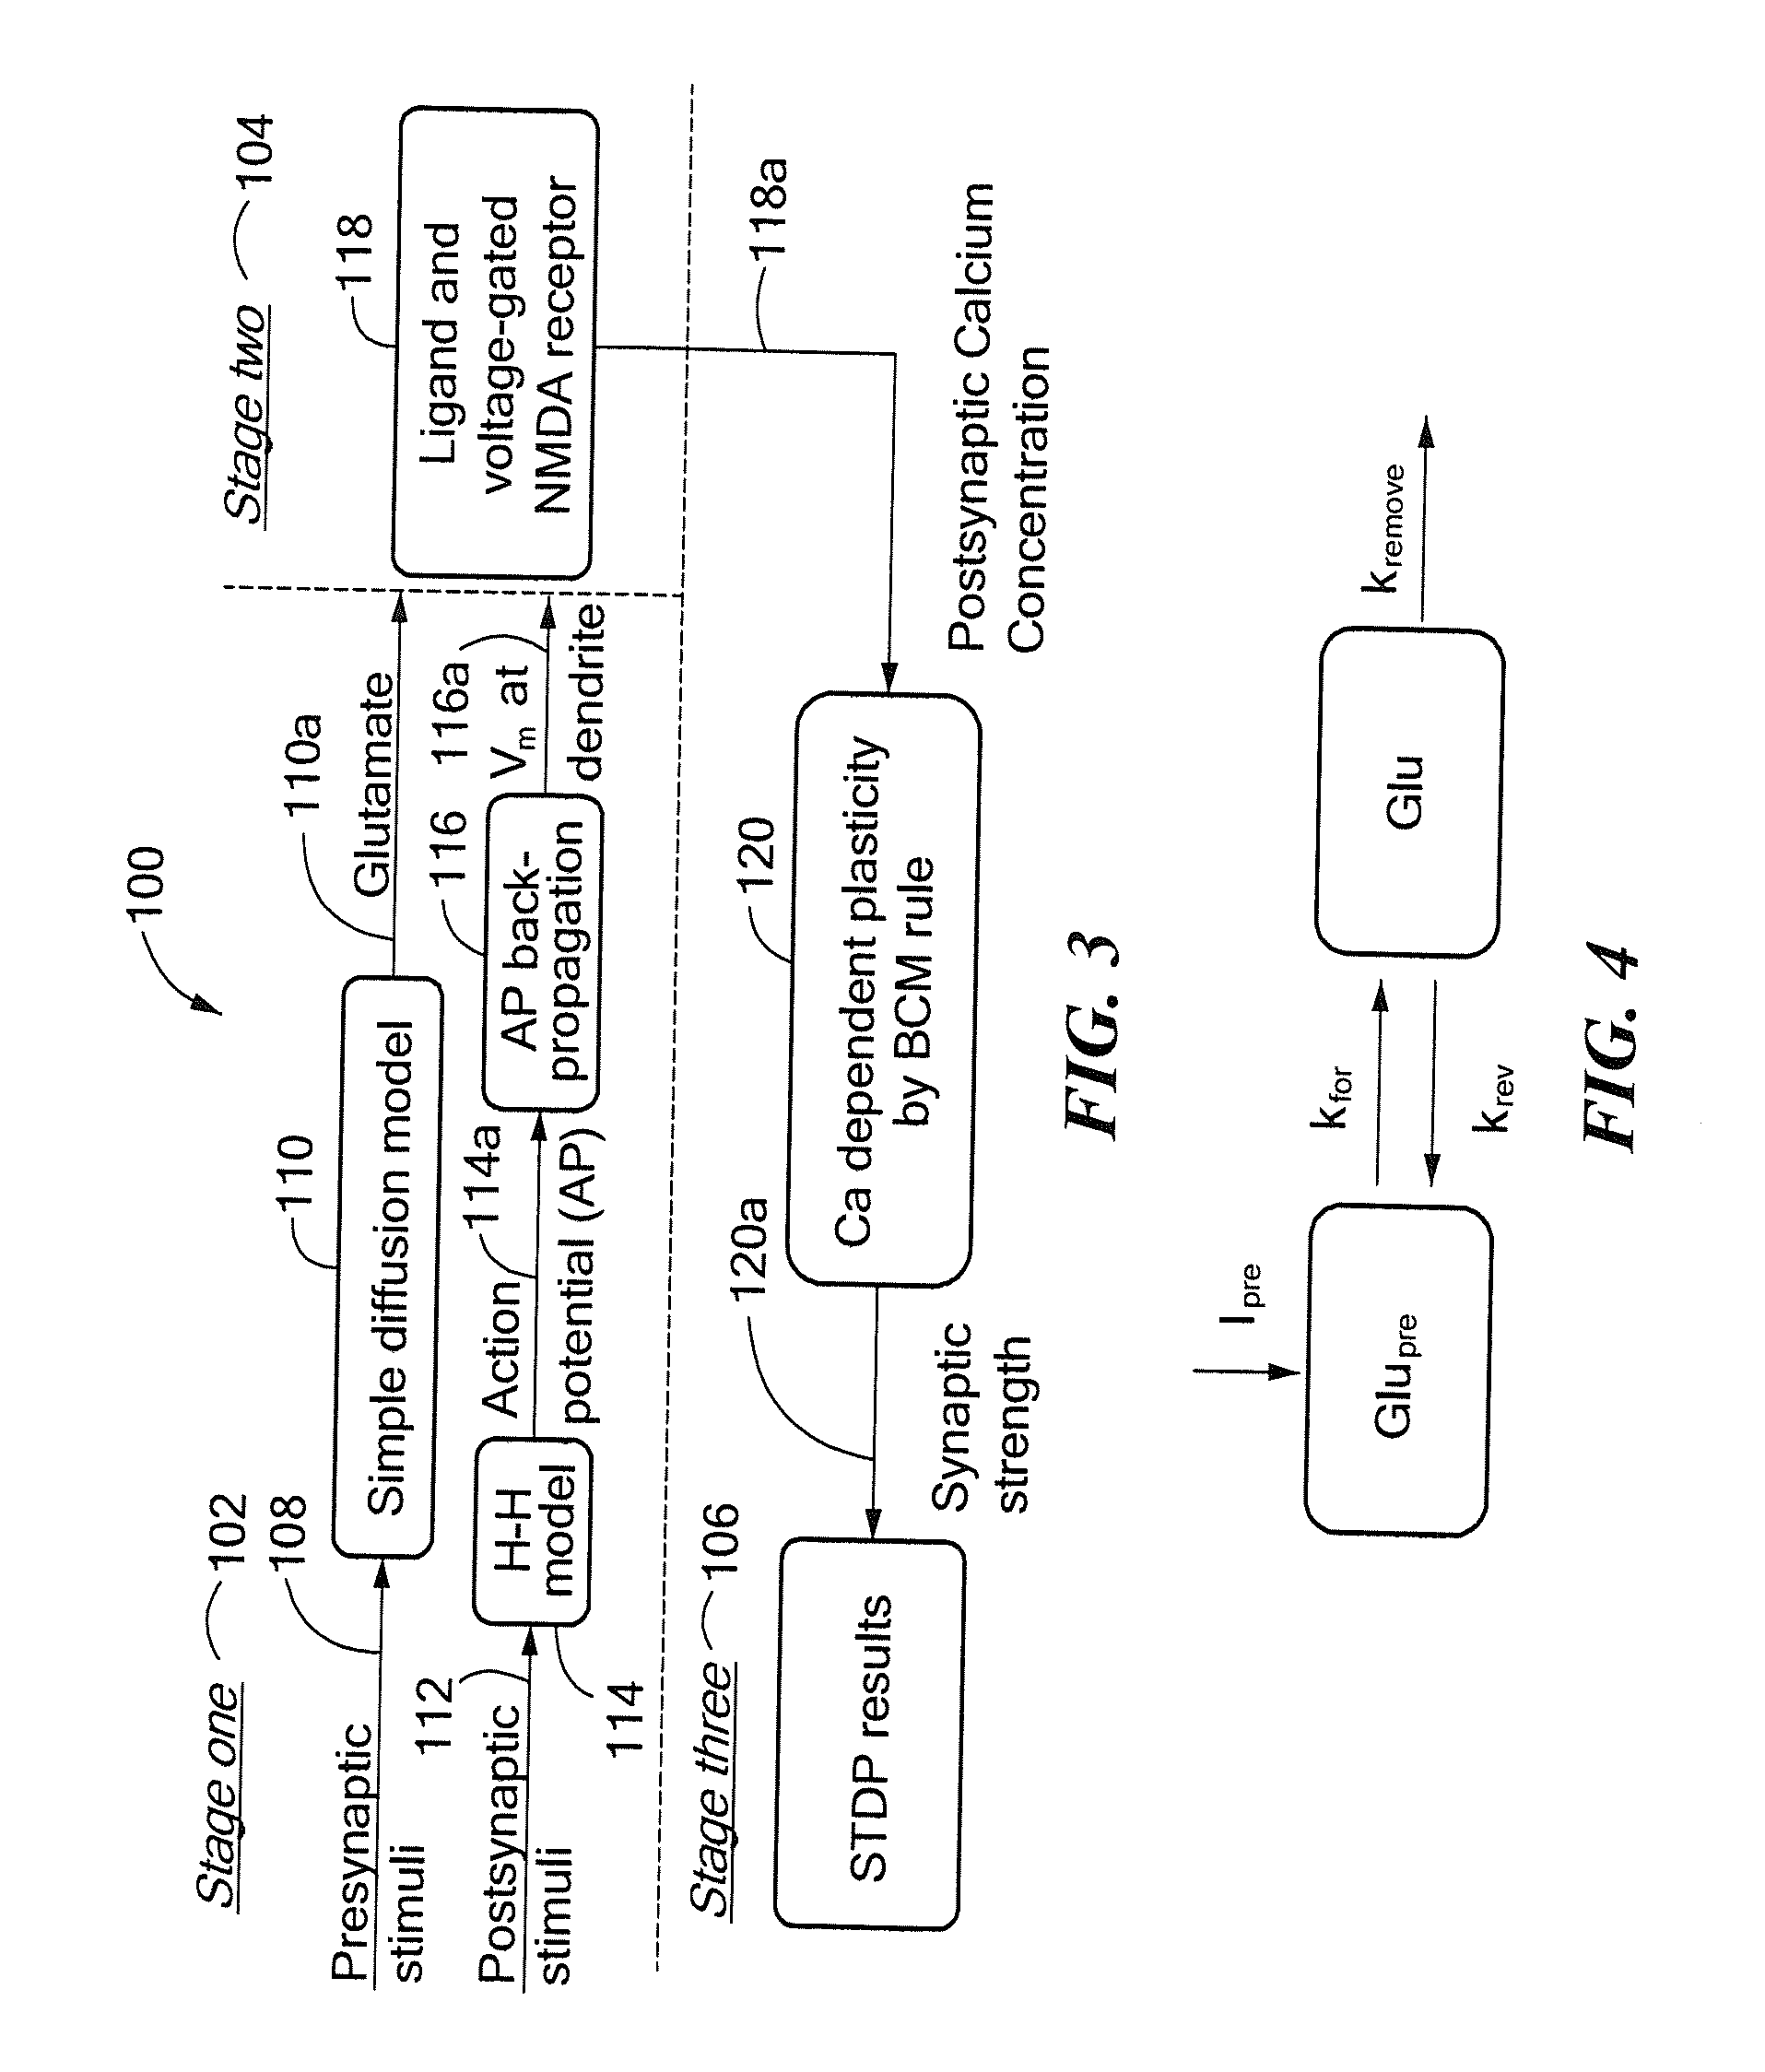 Circuits and Methods Representative of Spike Timing Dependent Plasticity of Neurons